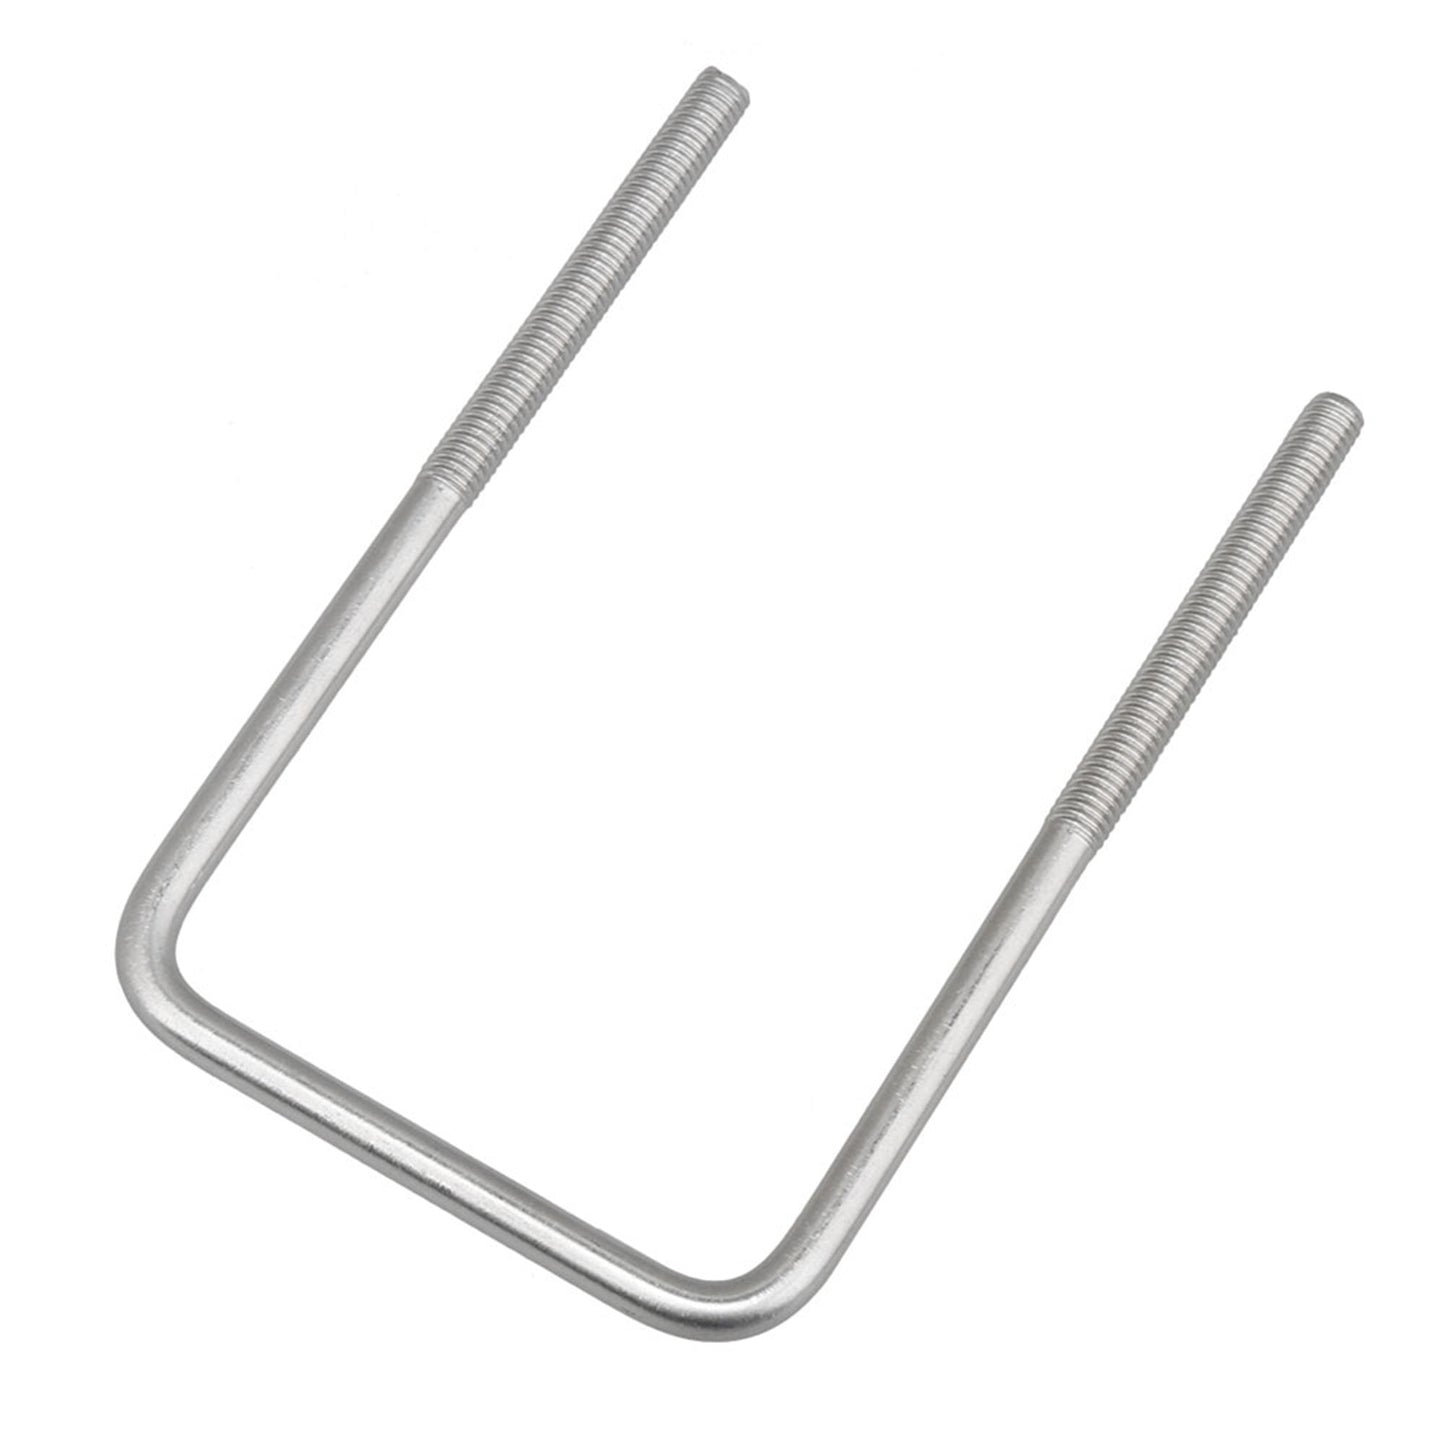 BQLZR Silver 304 Stainless Steel U Bolt Square Shape M6x60x110 with Plate Nut Set